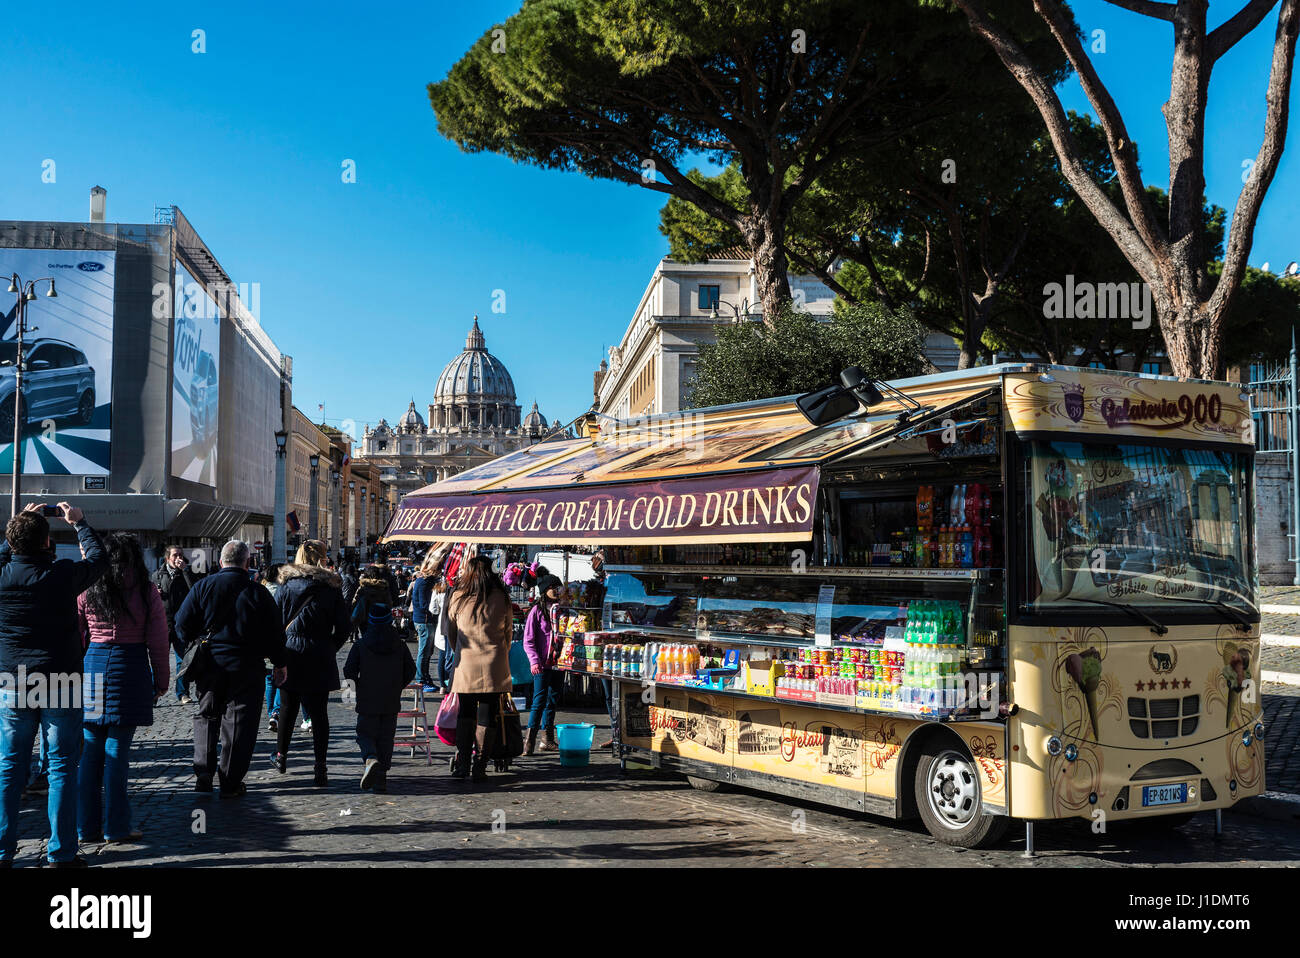 Rome, Italy - January 5, 2017: Food truck on a street full of tourists with the dome of the Vatican in the background in Rome, Italy Stock Photo